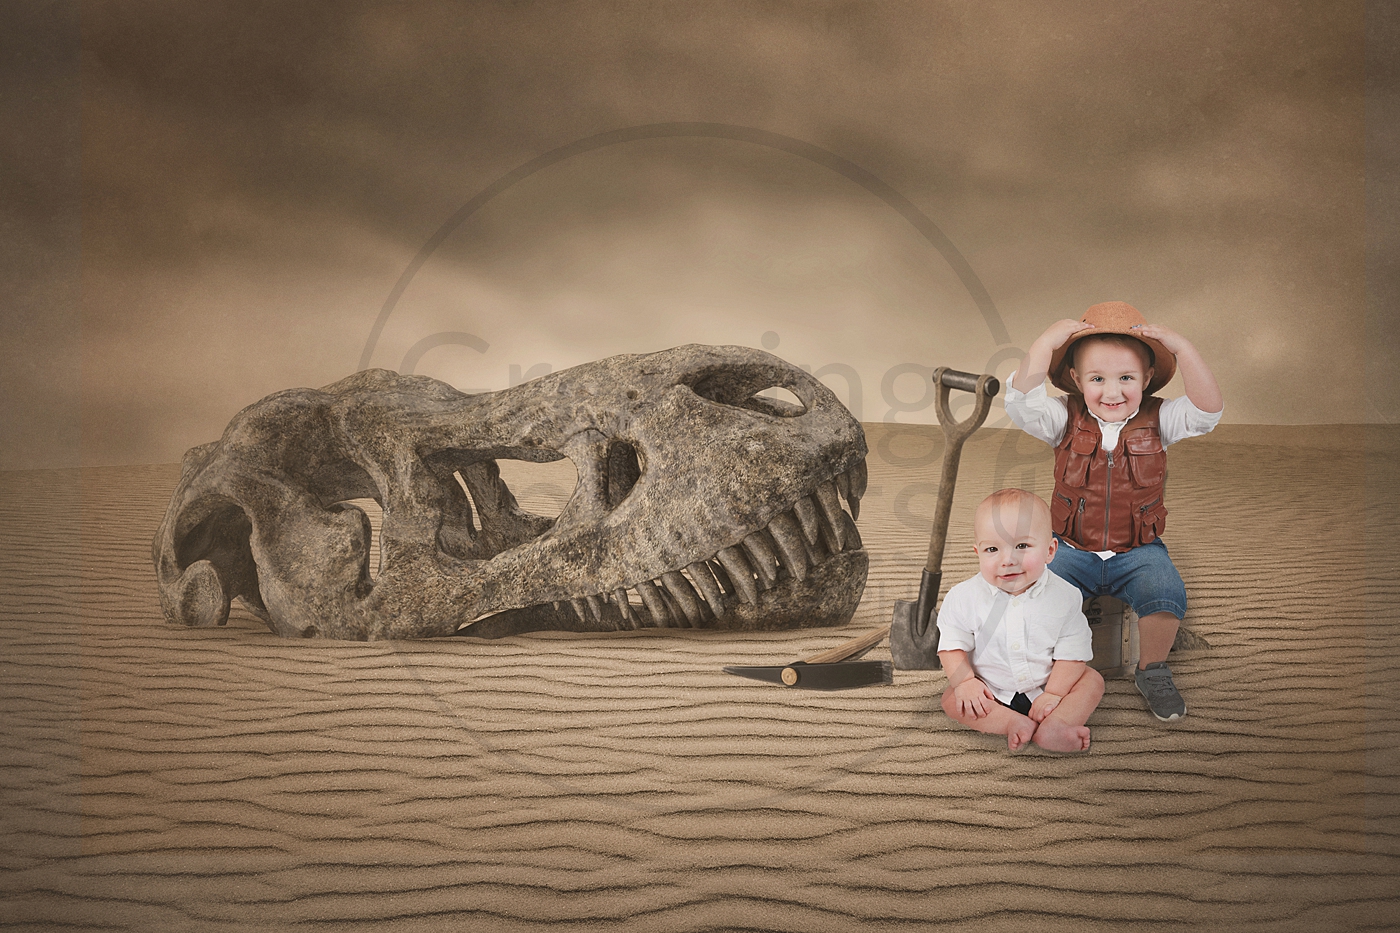 A Dino-rific Day:  Unearthing Treasures and Playing with Baby Dinosaurs!